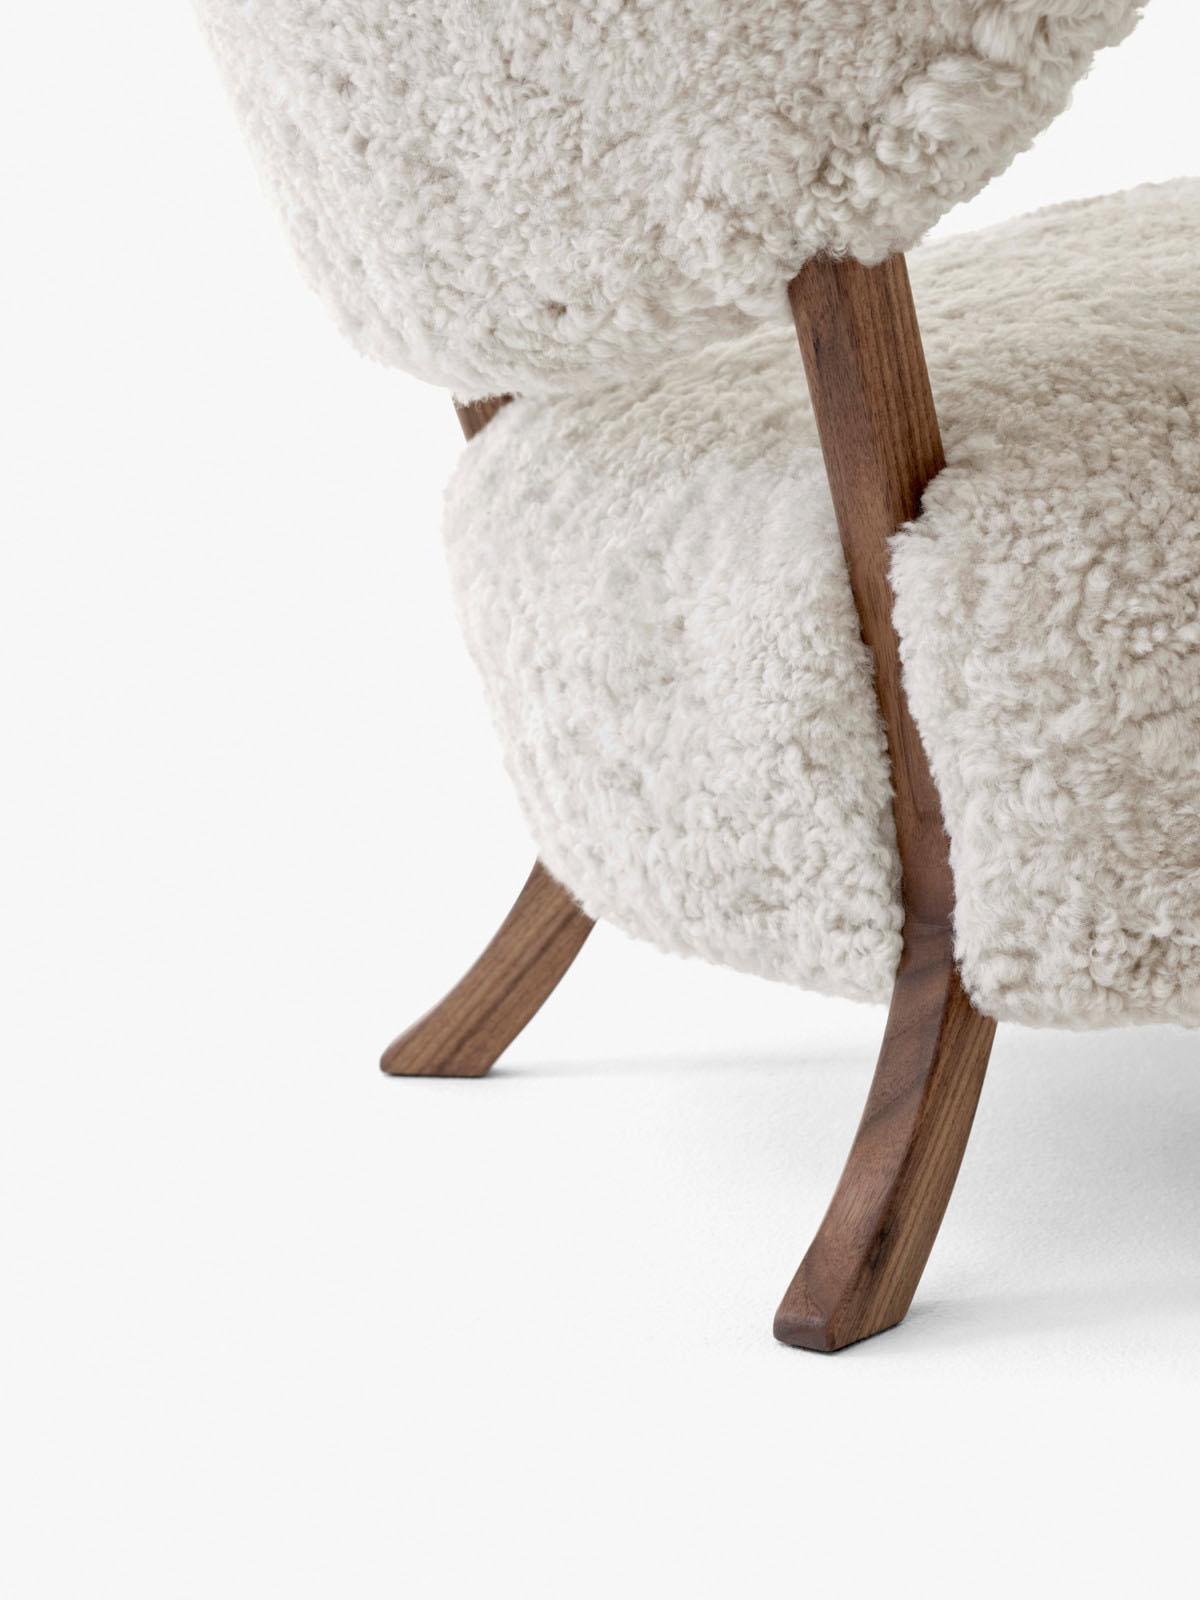 Contemporary Set of 2 Wulff Atd2 & Pouf Atd3 in Sheepskin Moonlight/Walnut for & Tradition For Sale